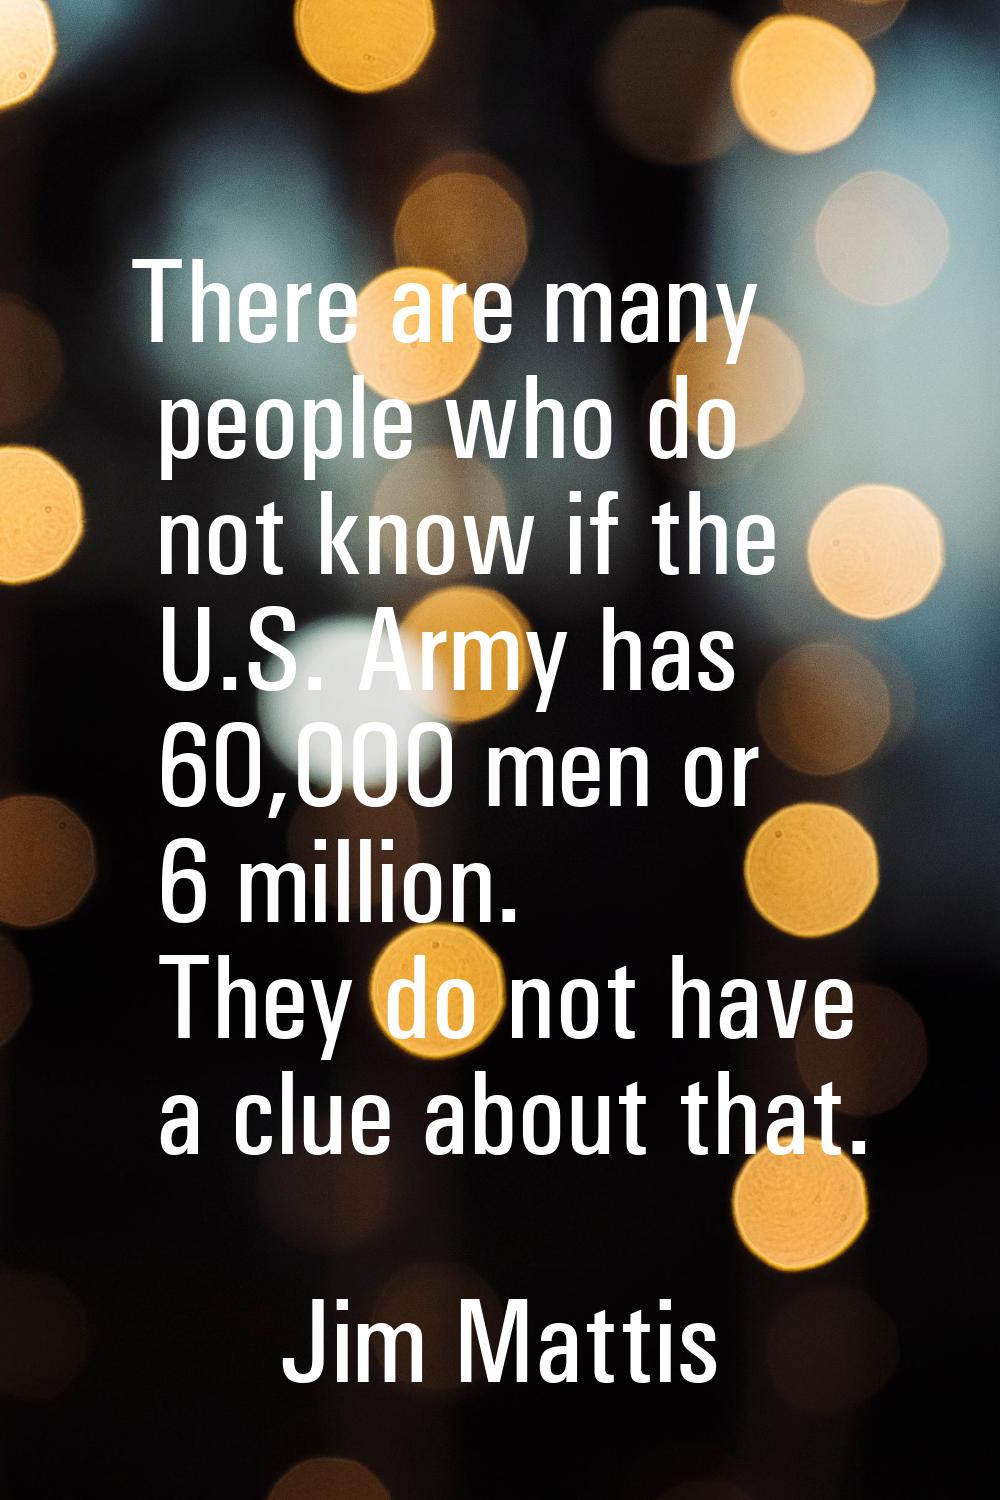 There are many people who do not know if the U.S. Army has 60,000 men or 6 million. They do not hav